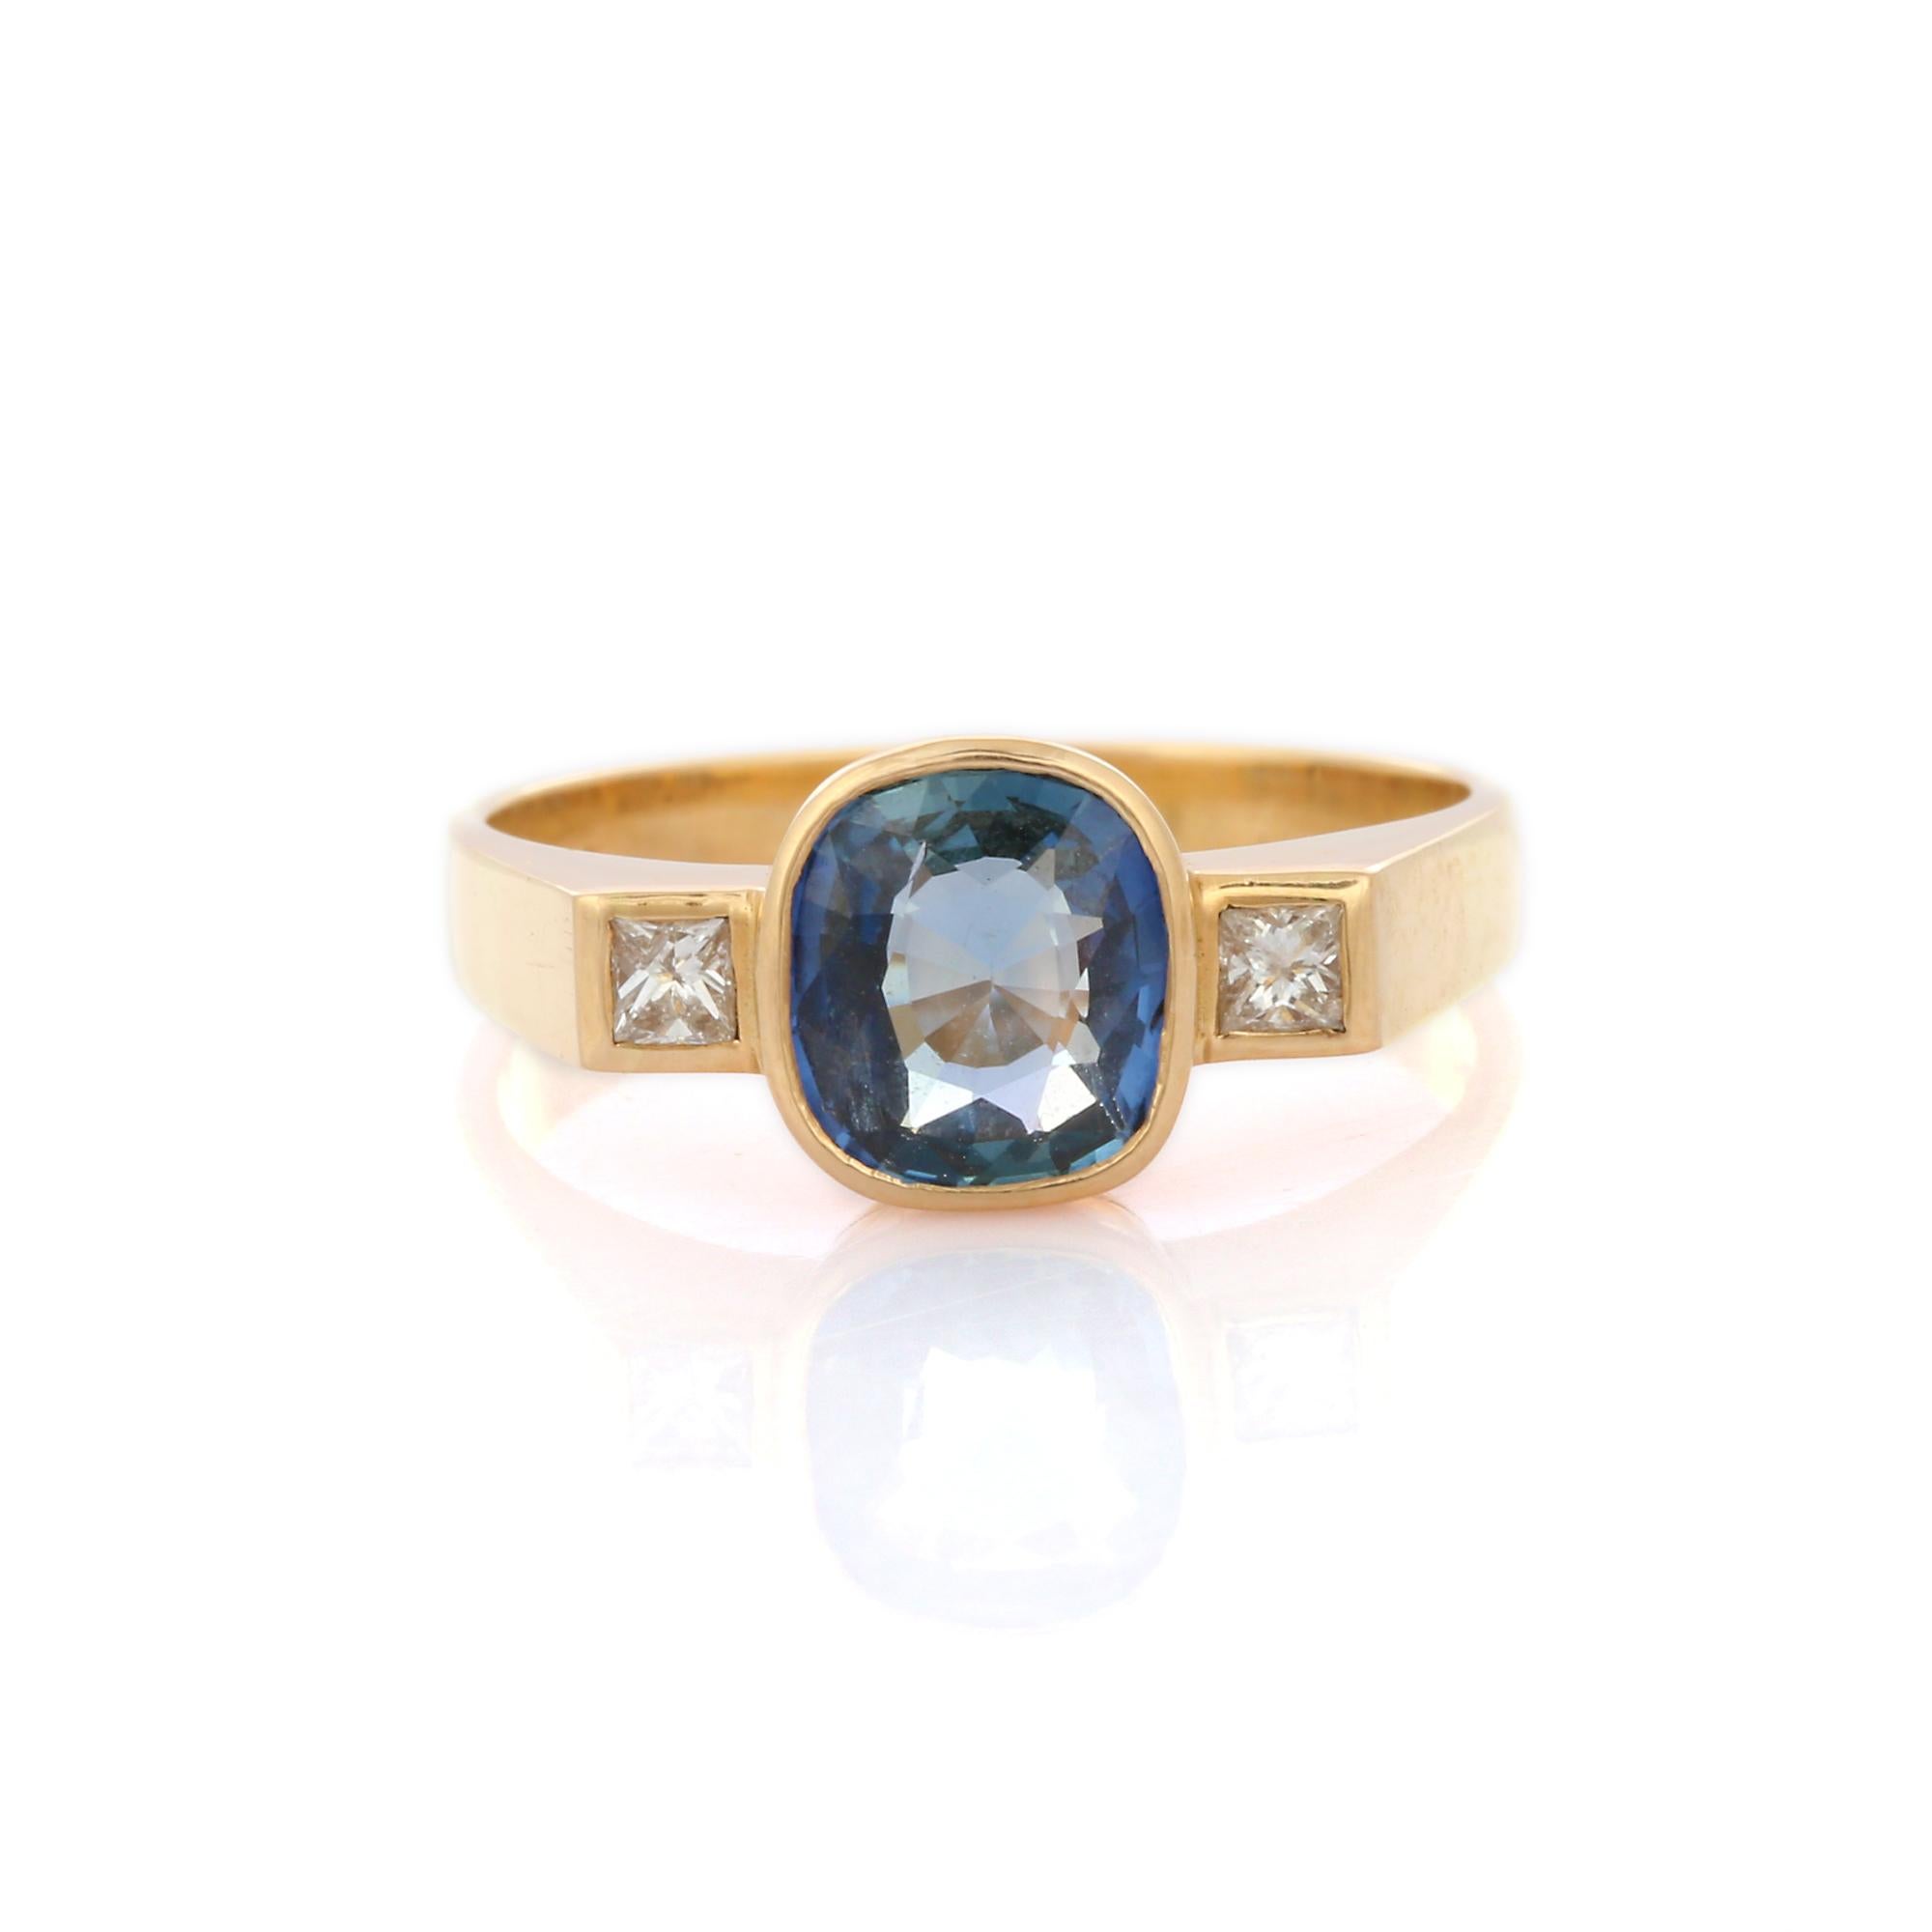 For Sale:  Blue Sapphire Diamond Three Stone Engagement Ring in 18K Yellow Gold 2